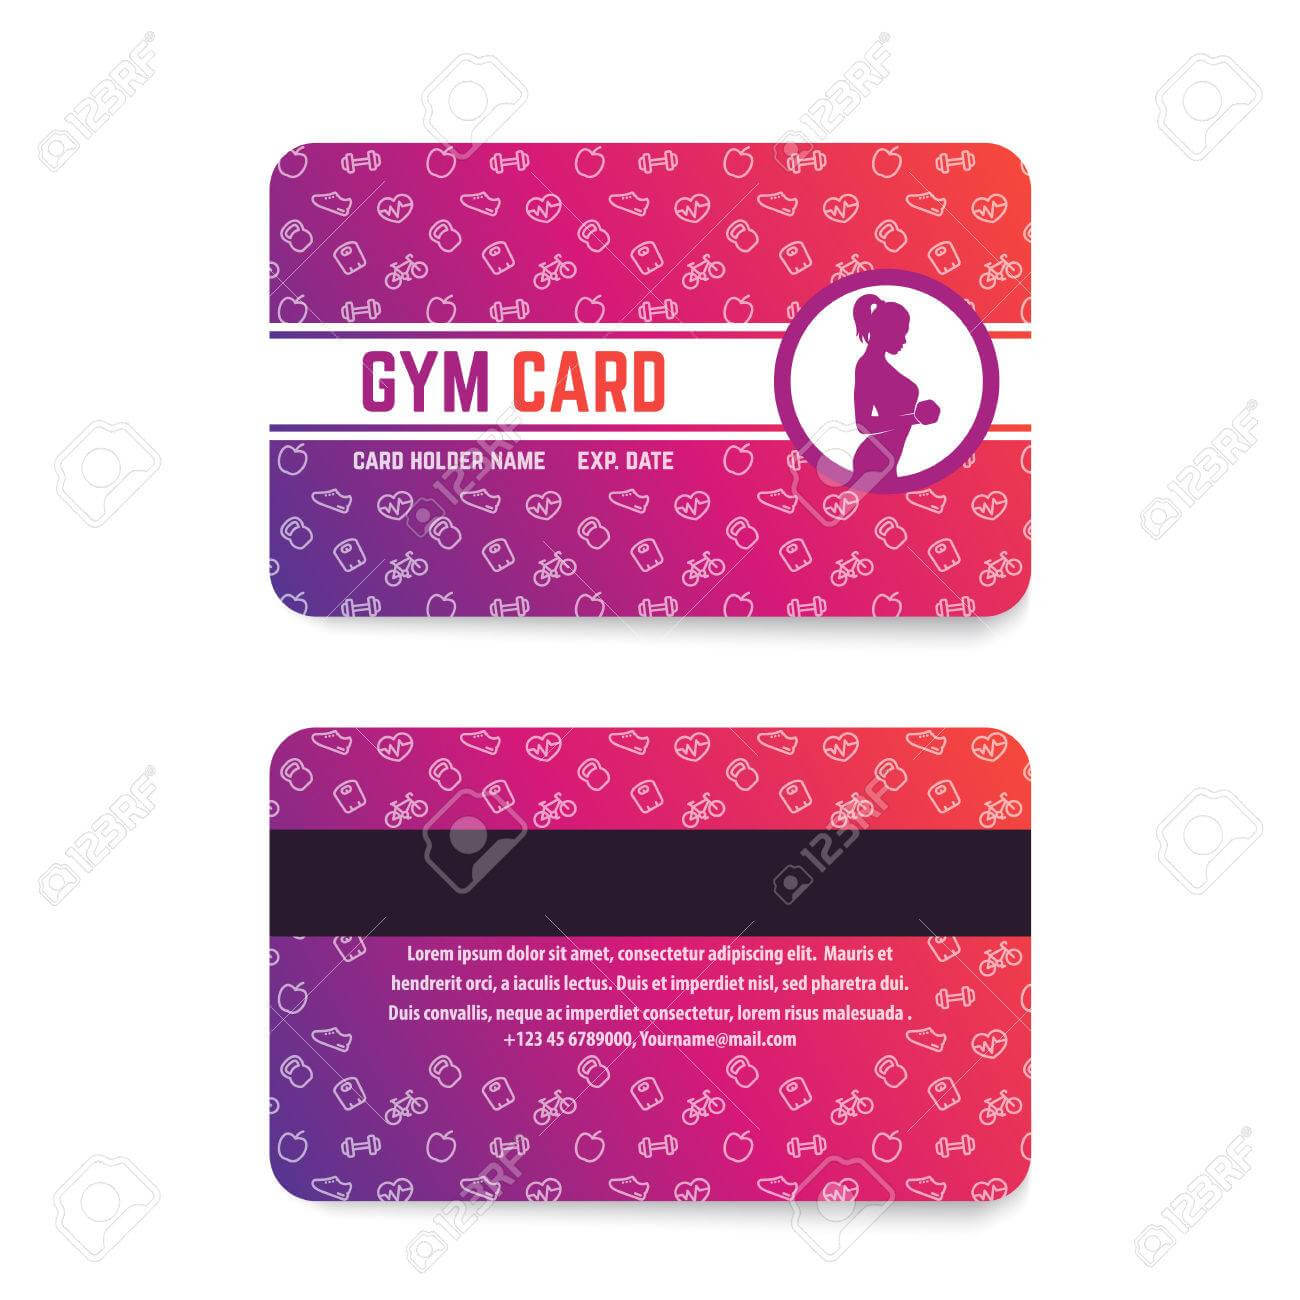 A Fitness Club Or Gym Card Template. With Regard To Gym Membership Card Template